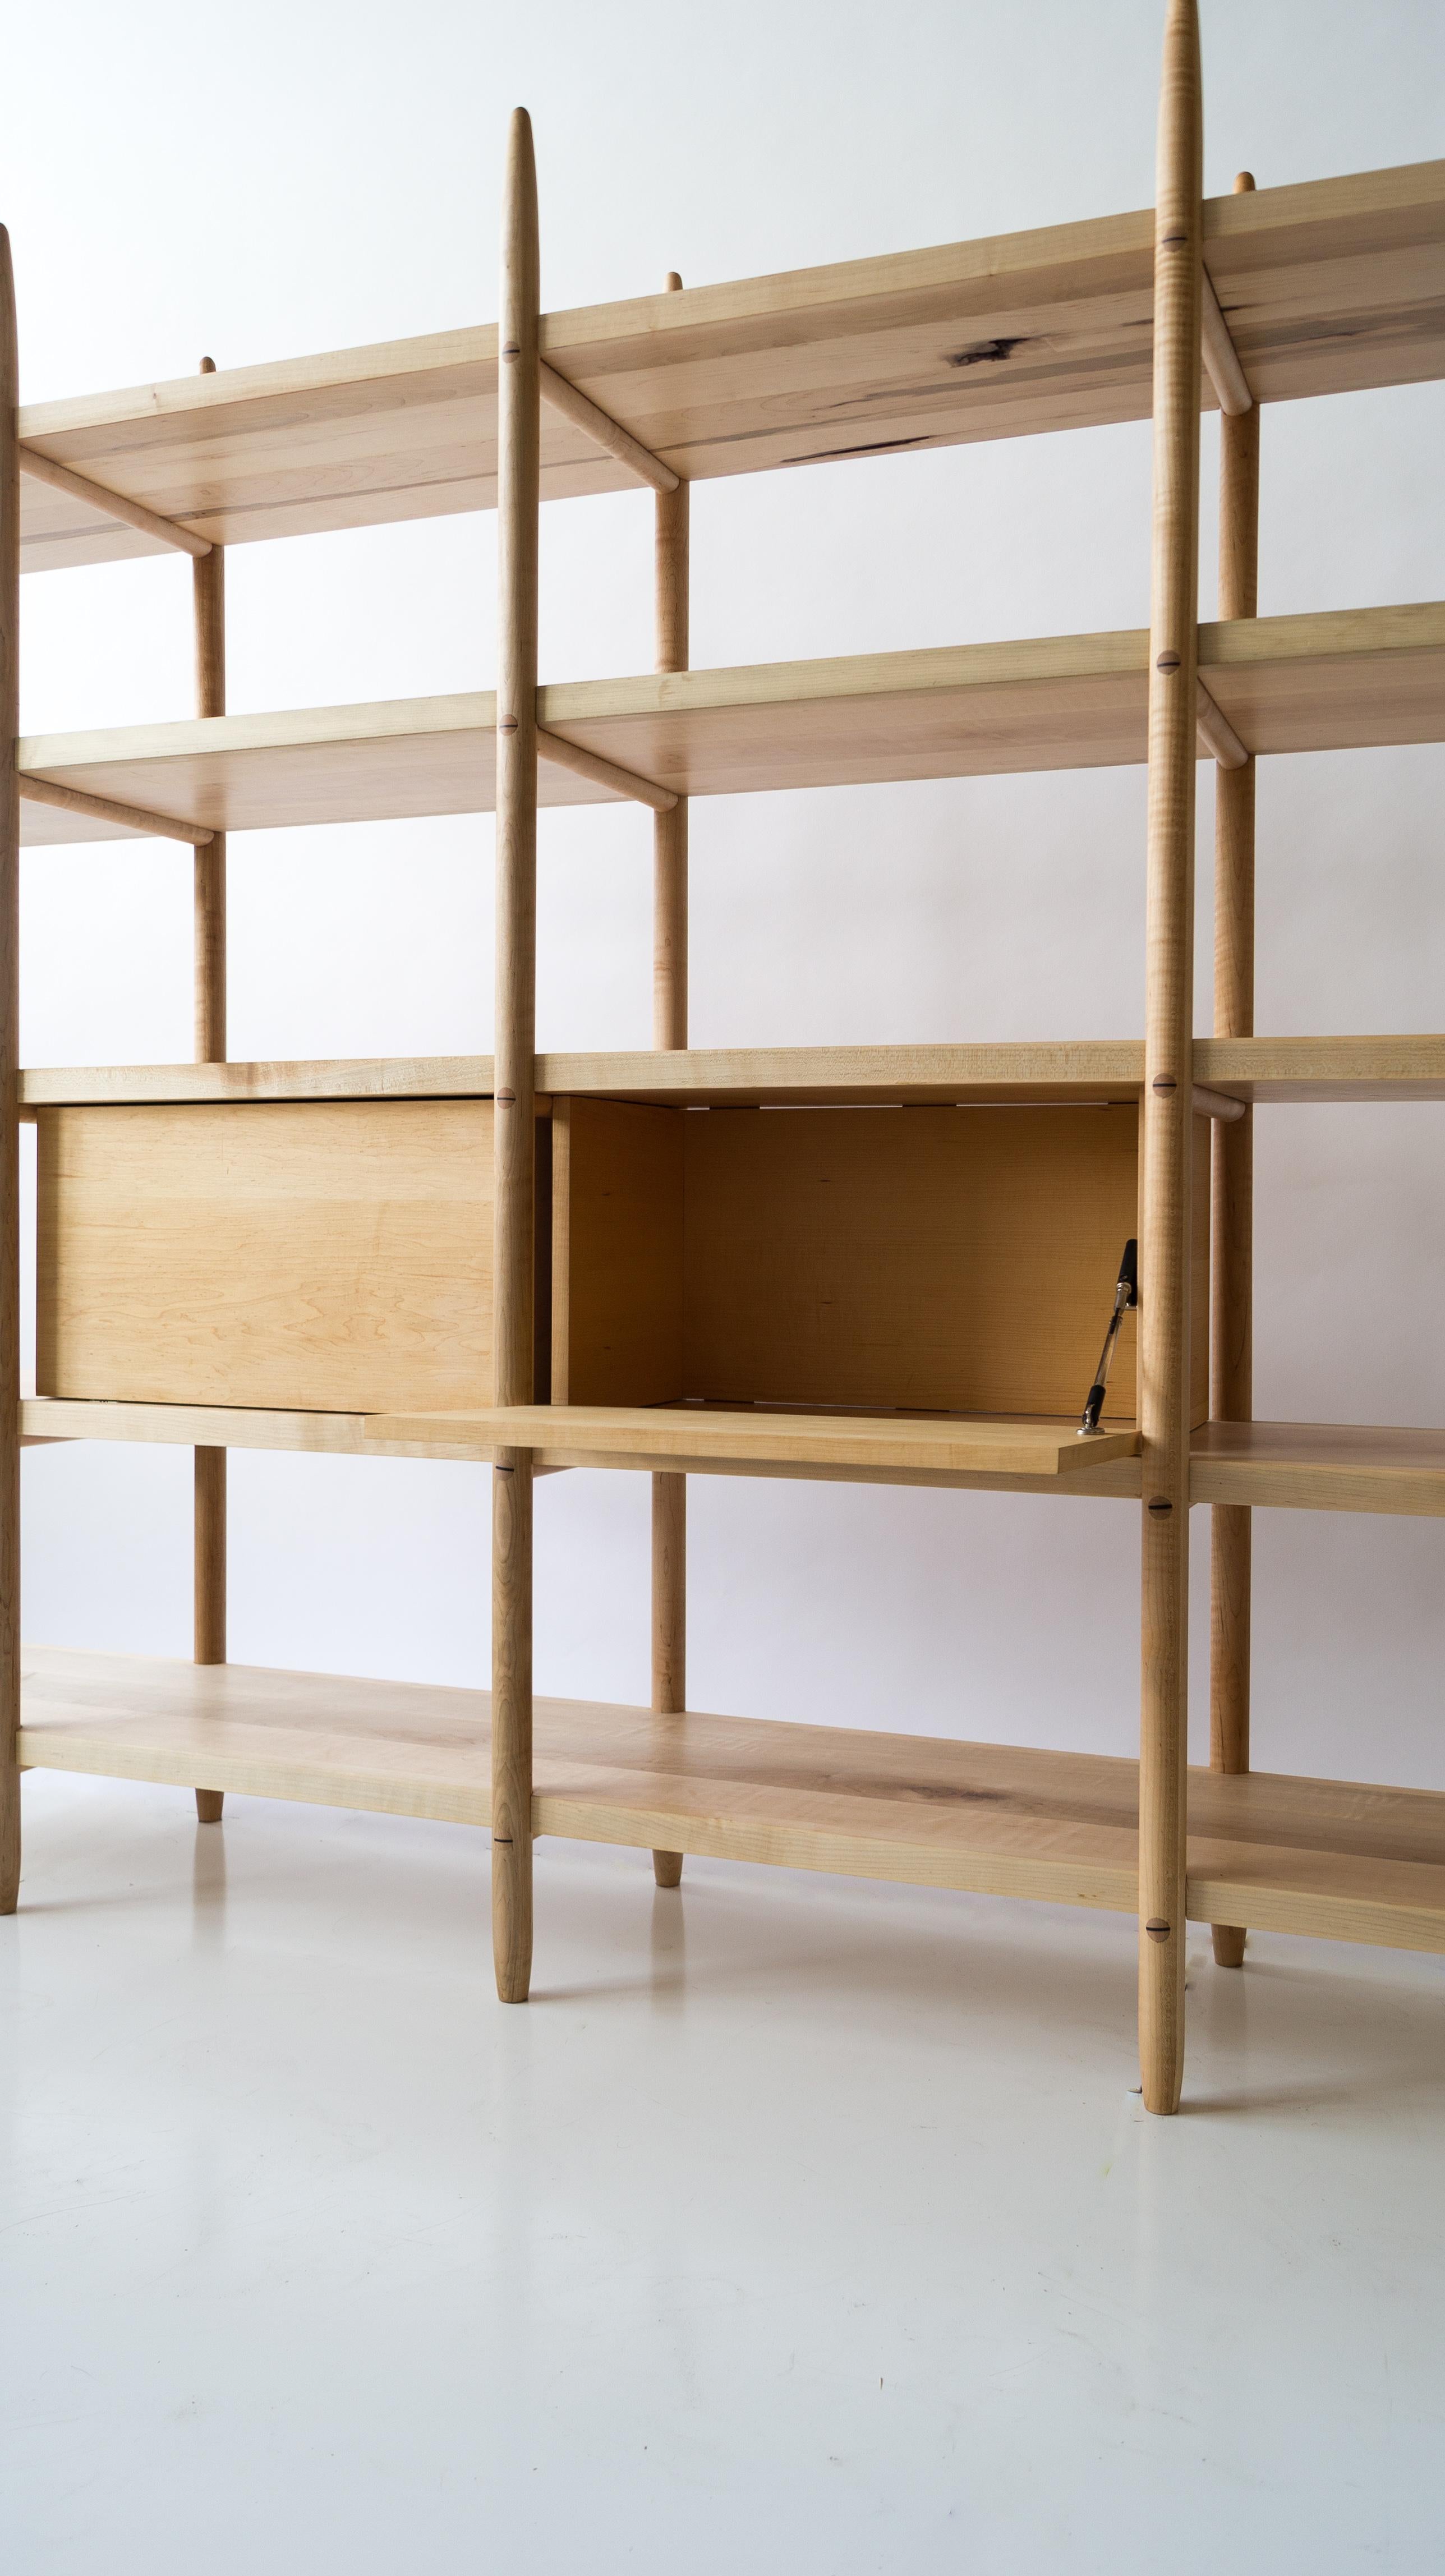 The Deepstep shelving includes exquisite wood detailing and a clean, clear profile. Designed entirely without fasteners or screws, the design instead utilizes traditional and innovative wood joinery solutions. 

Designed and handmade with the